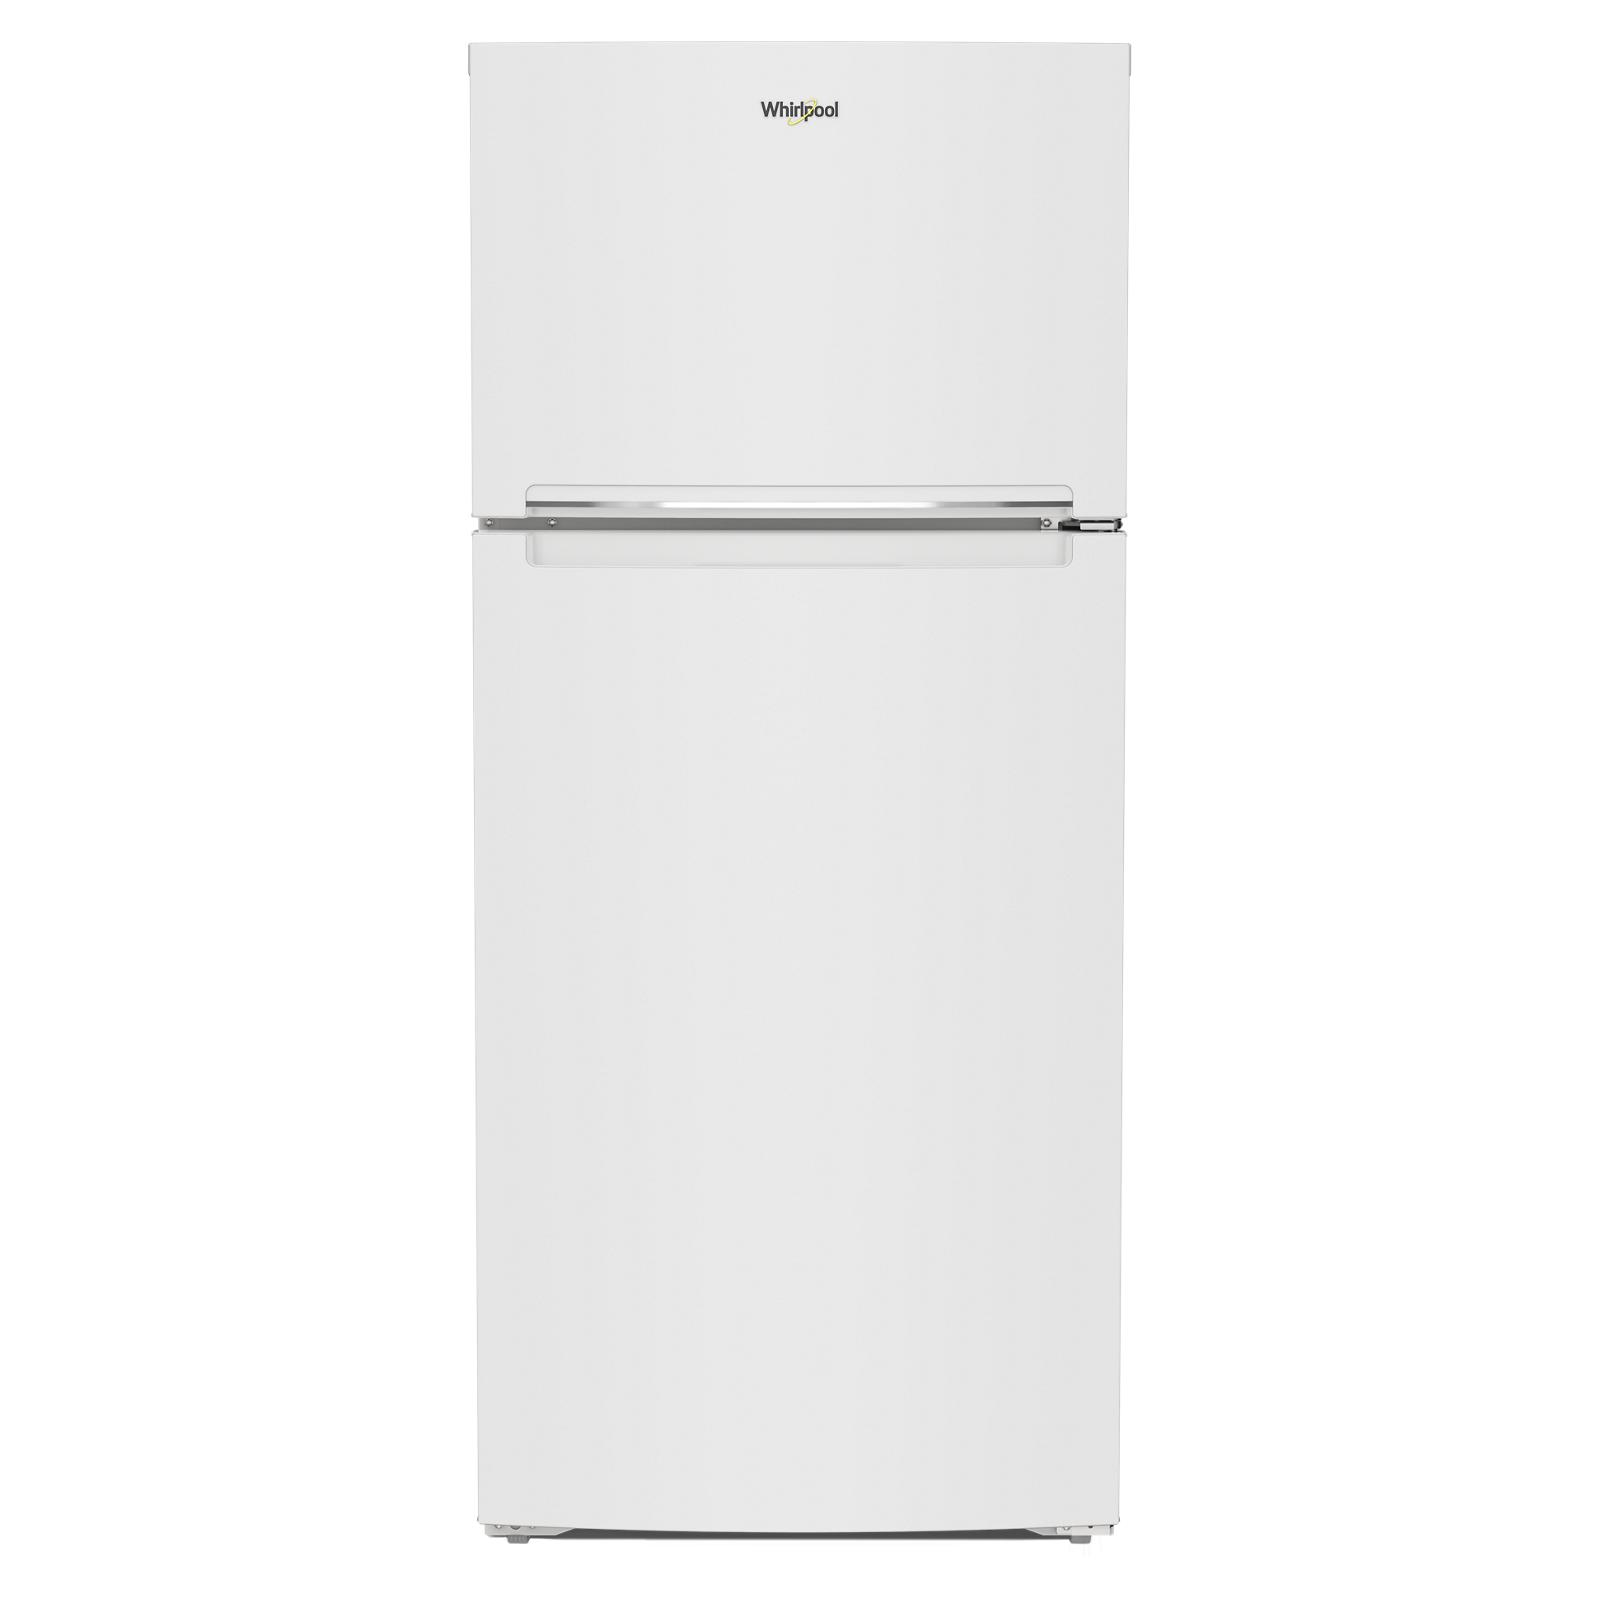 Whirlpool - 28.13 Inch 16.6 cu. ft Top Mount Refrigerator in White - WRTX5028PW